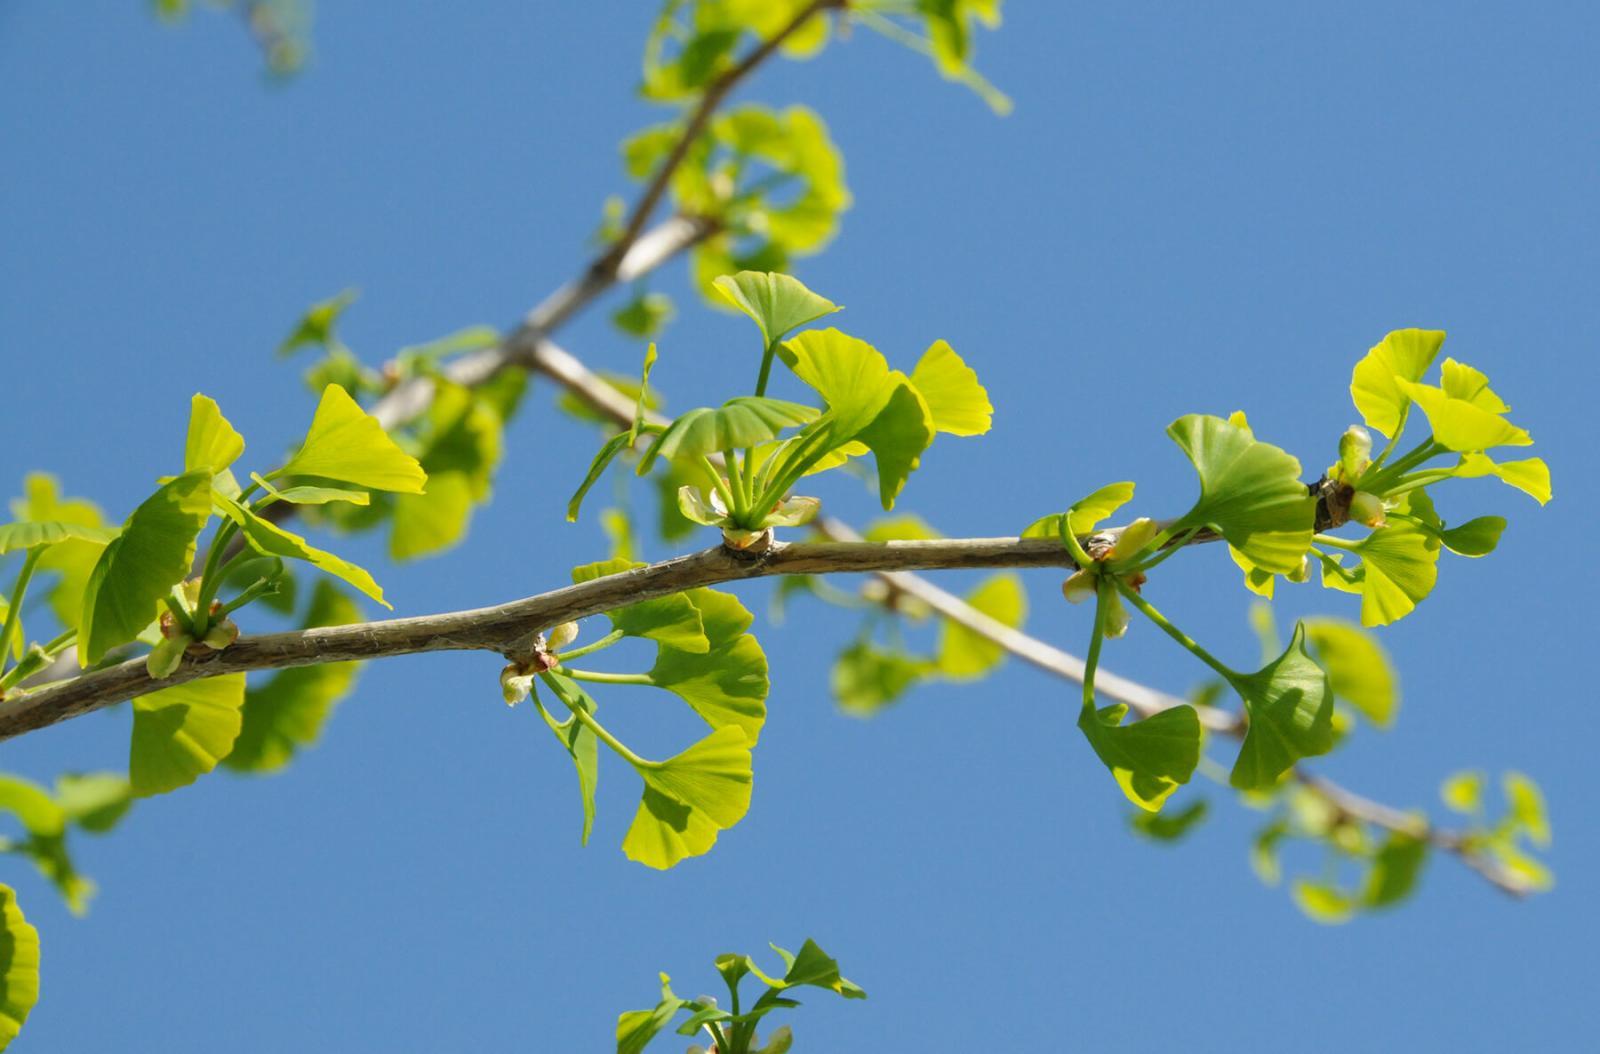 Ginkgo is truly a tree worth planting for future generations